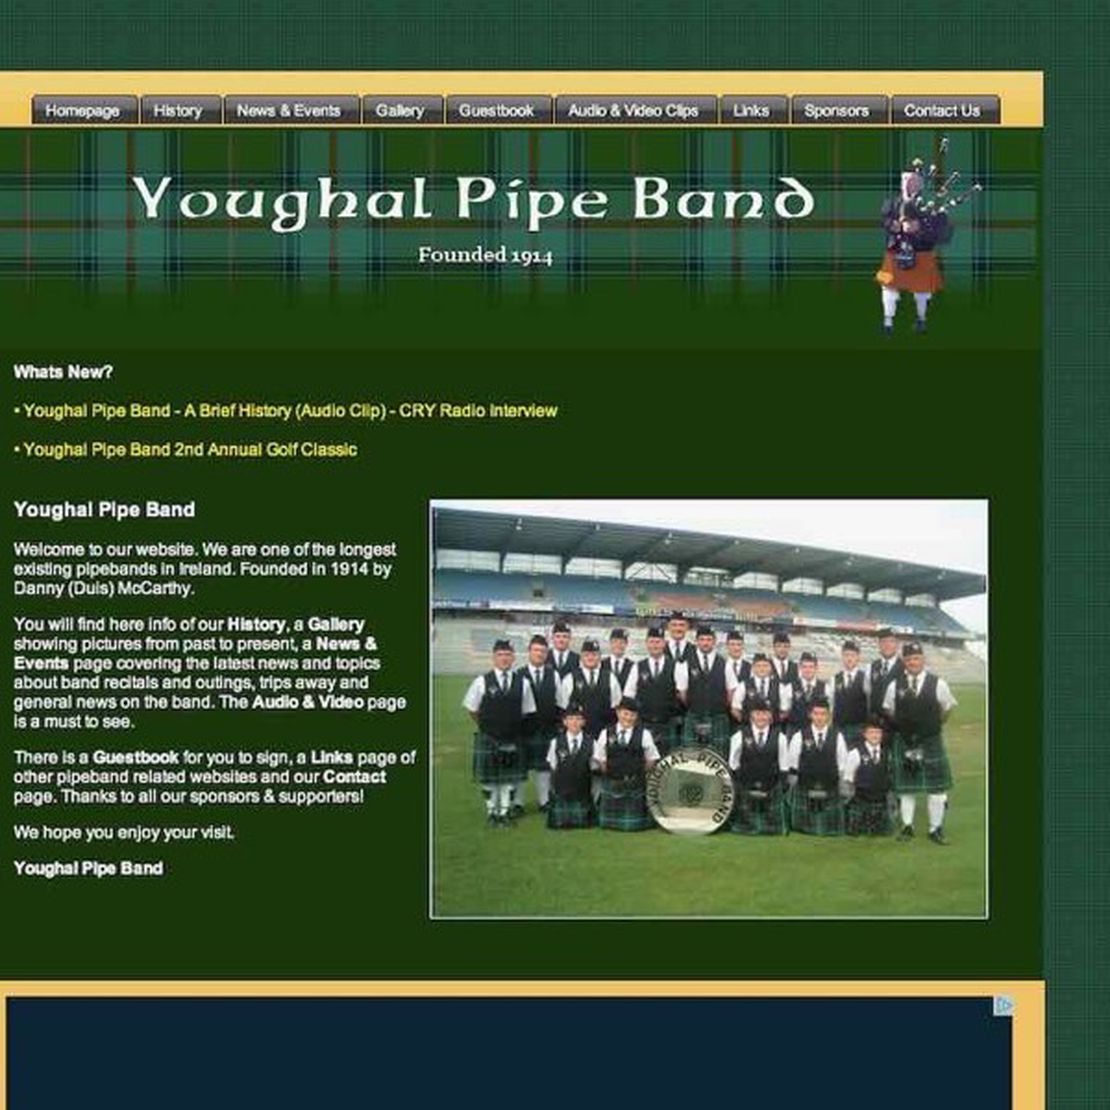 youghal pipe band